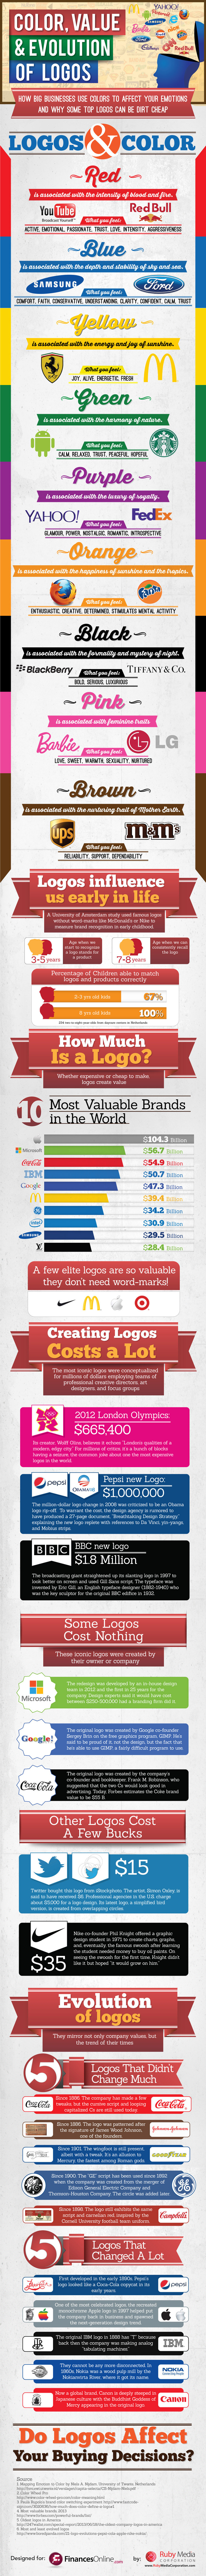 Importance of Color When Designing a Logo for Your Company (Infographic)